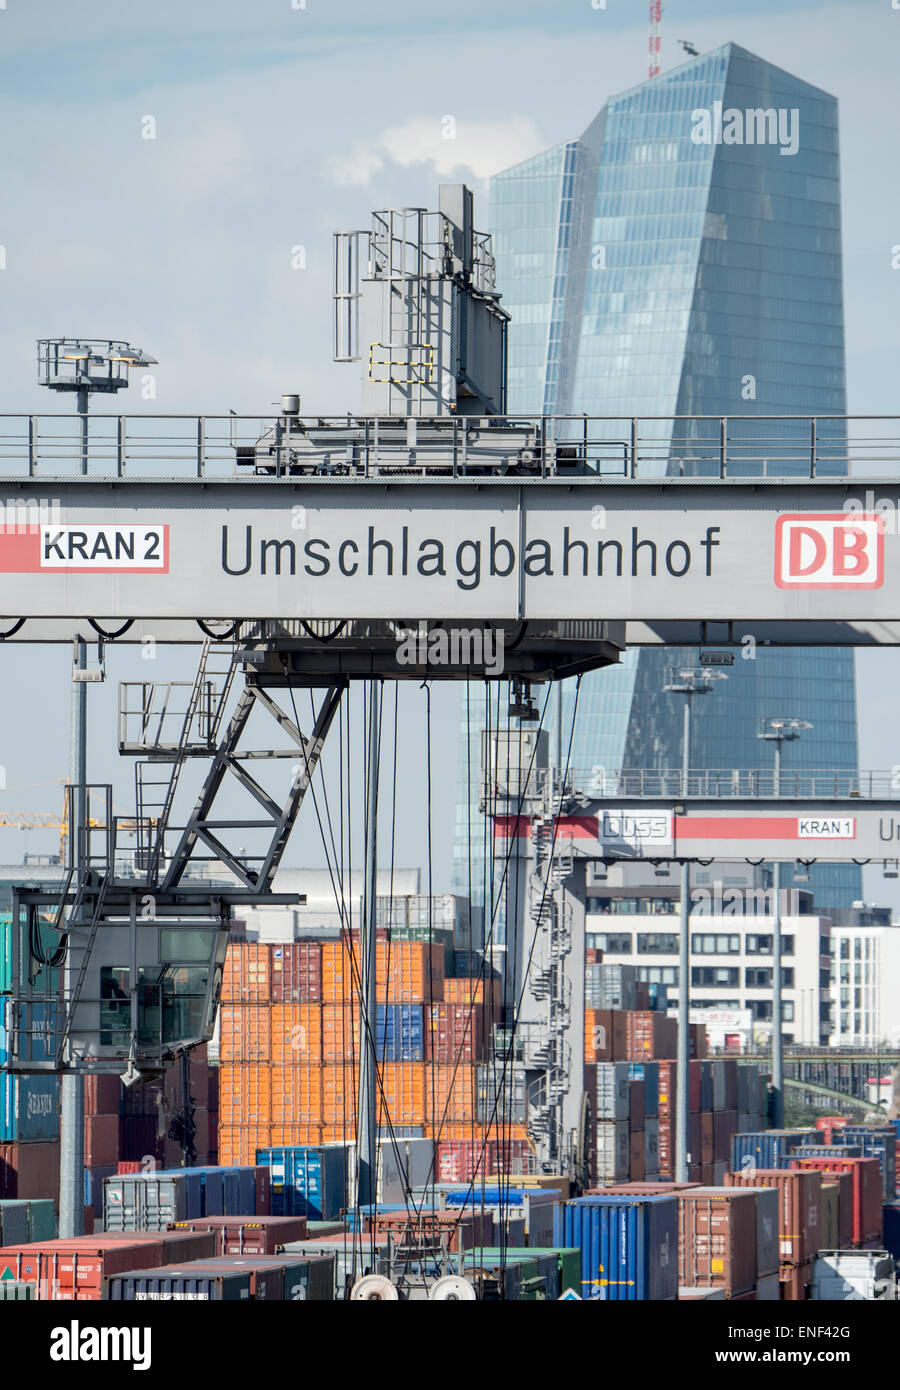 Frankfurt, Germany. 28th Apr, 2015. Containers are loaded from a truck onto tracks at a transshipment station in Frankfurt, Germany, 28 April 2015. Inbound containers are immediately loaded onto trains and trucks or stored temporarily in an open space area, based on a sophisticated logistics system. The headquarters of the European Central Bank (ECB) is pictured in the background. Photo: Boris Roessler/dpa/Alamy Live News Stock Photo